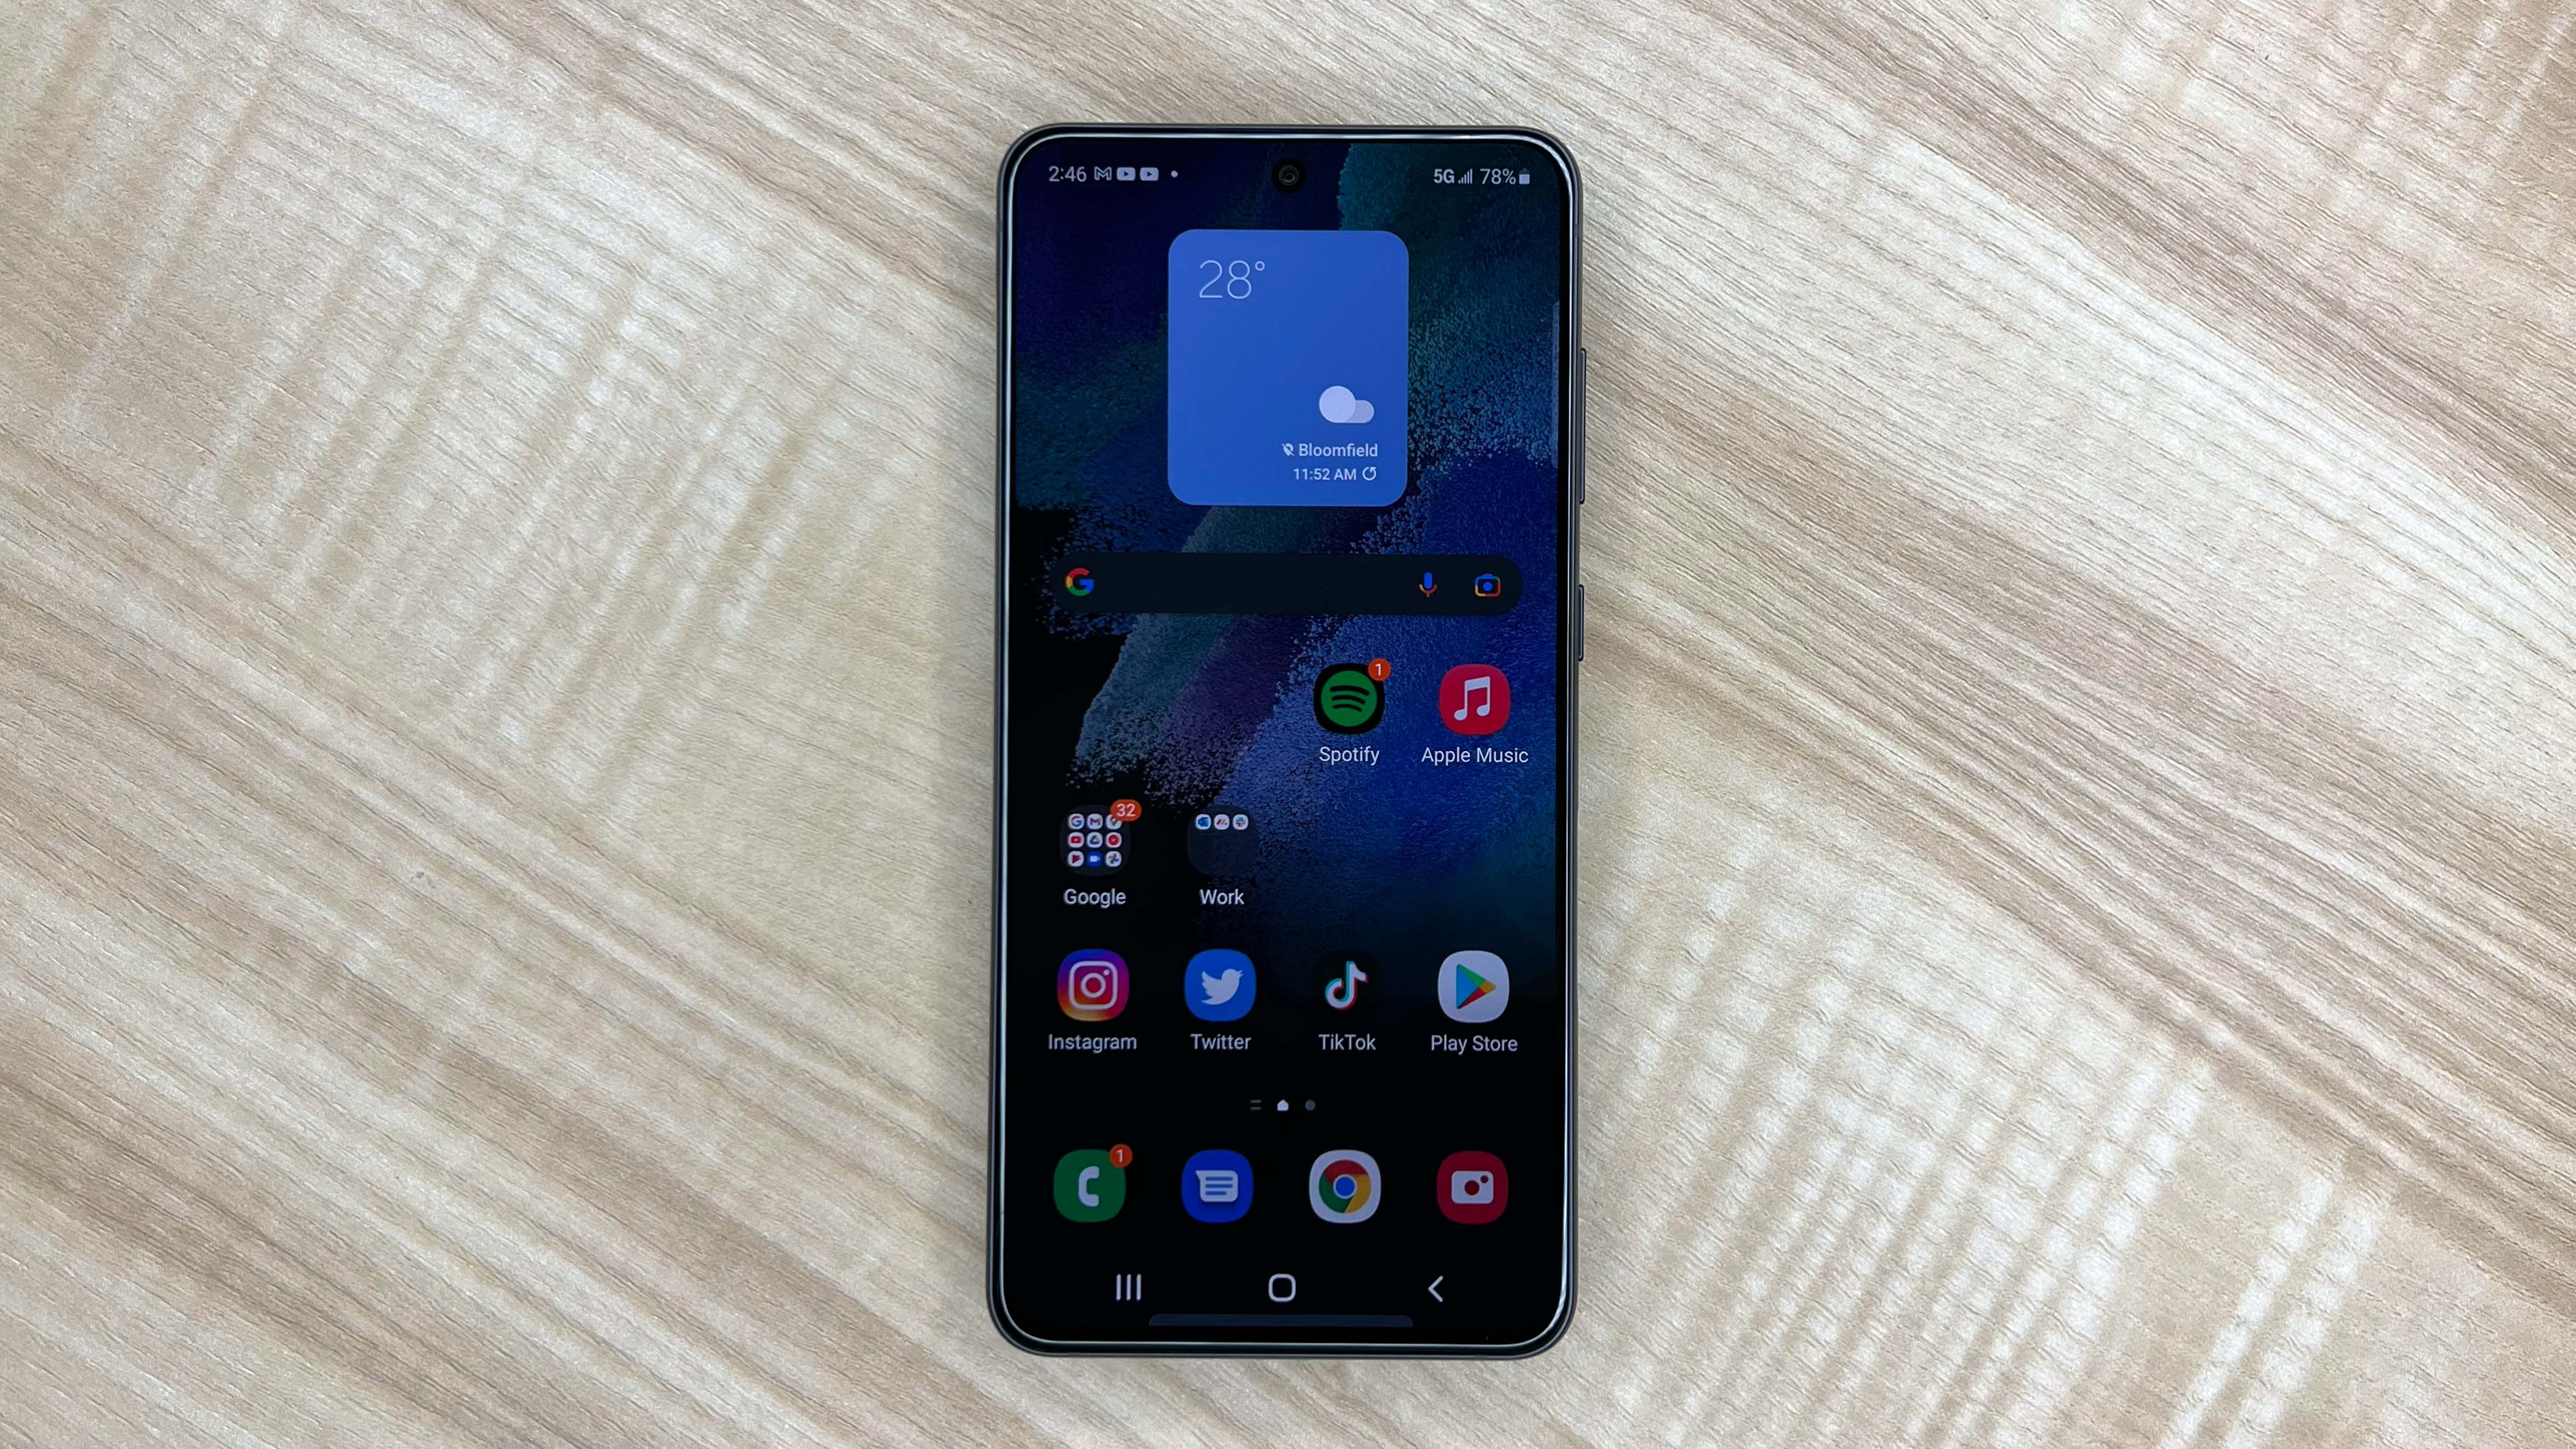 Samsung Galaxy S20 FE Review: Affordable flagship done right…almost